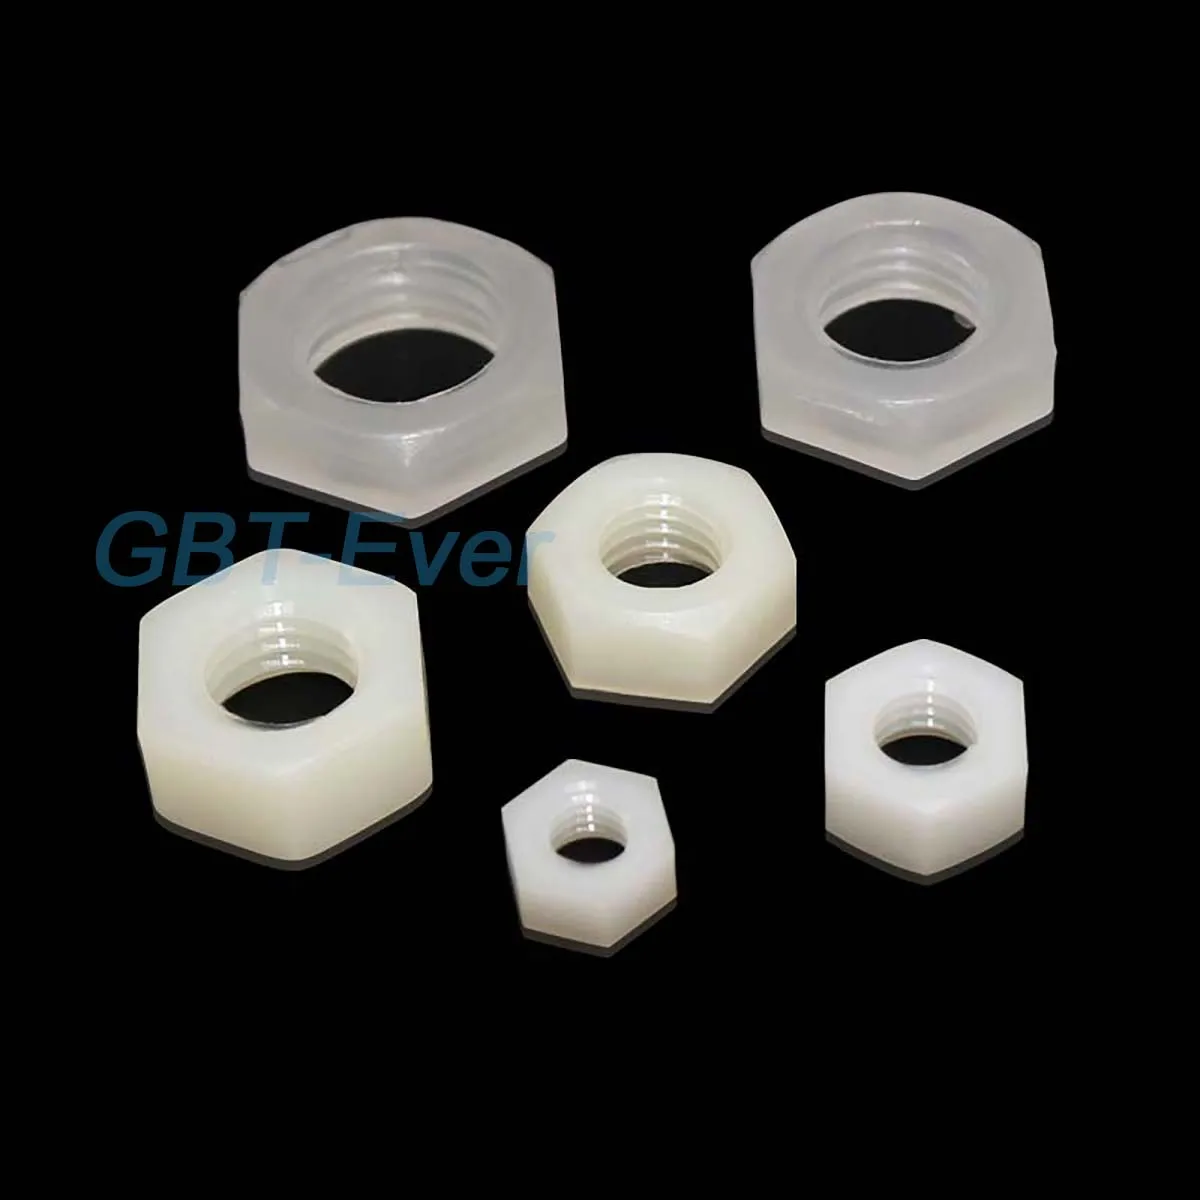 

20Pcs M5 M6 M8 M10 M12 M14 M16 G1/8 G1/4 G3/8 G1/2 Nylon Hex Nuts Hexagon Plastic Nuts Metric Thread Suit For Screws Bolts